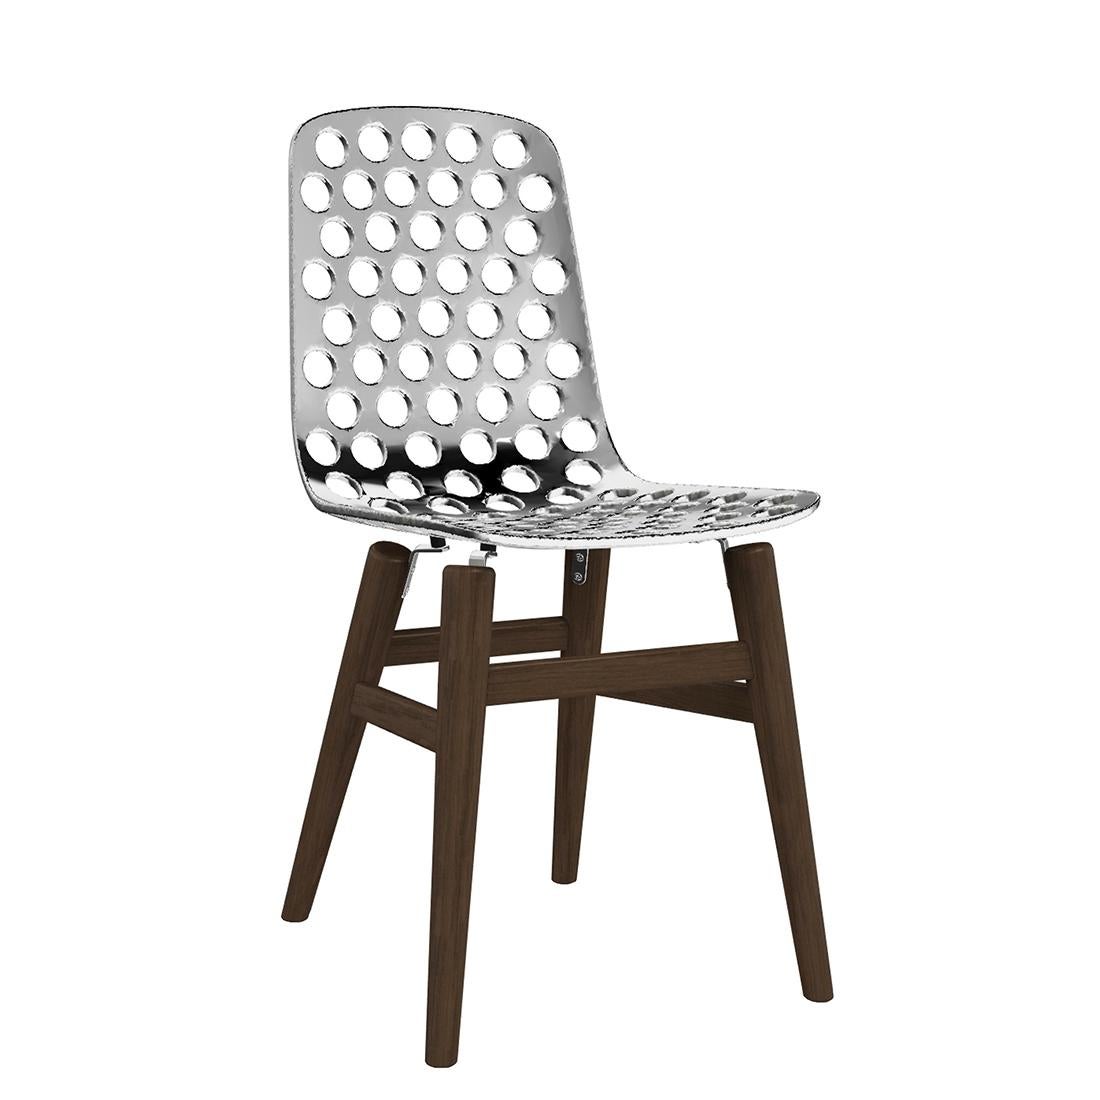 Aluminum Dotted Chair For Sale